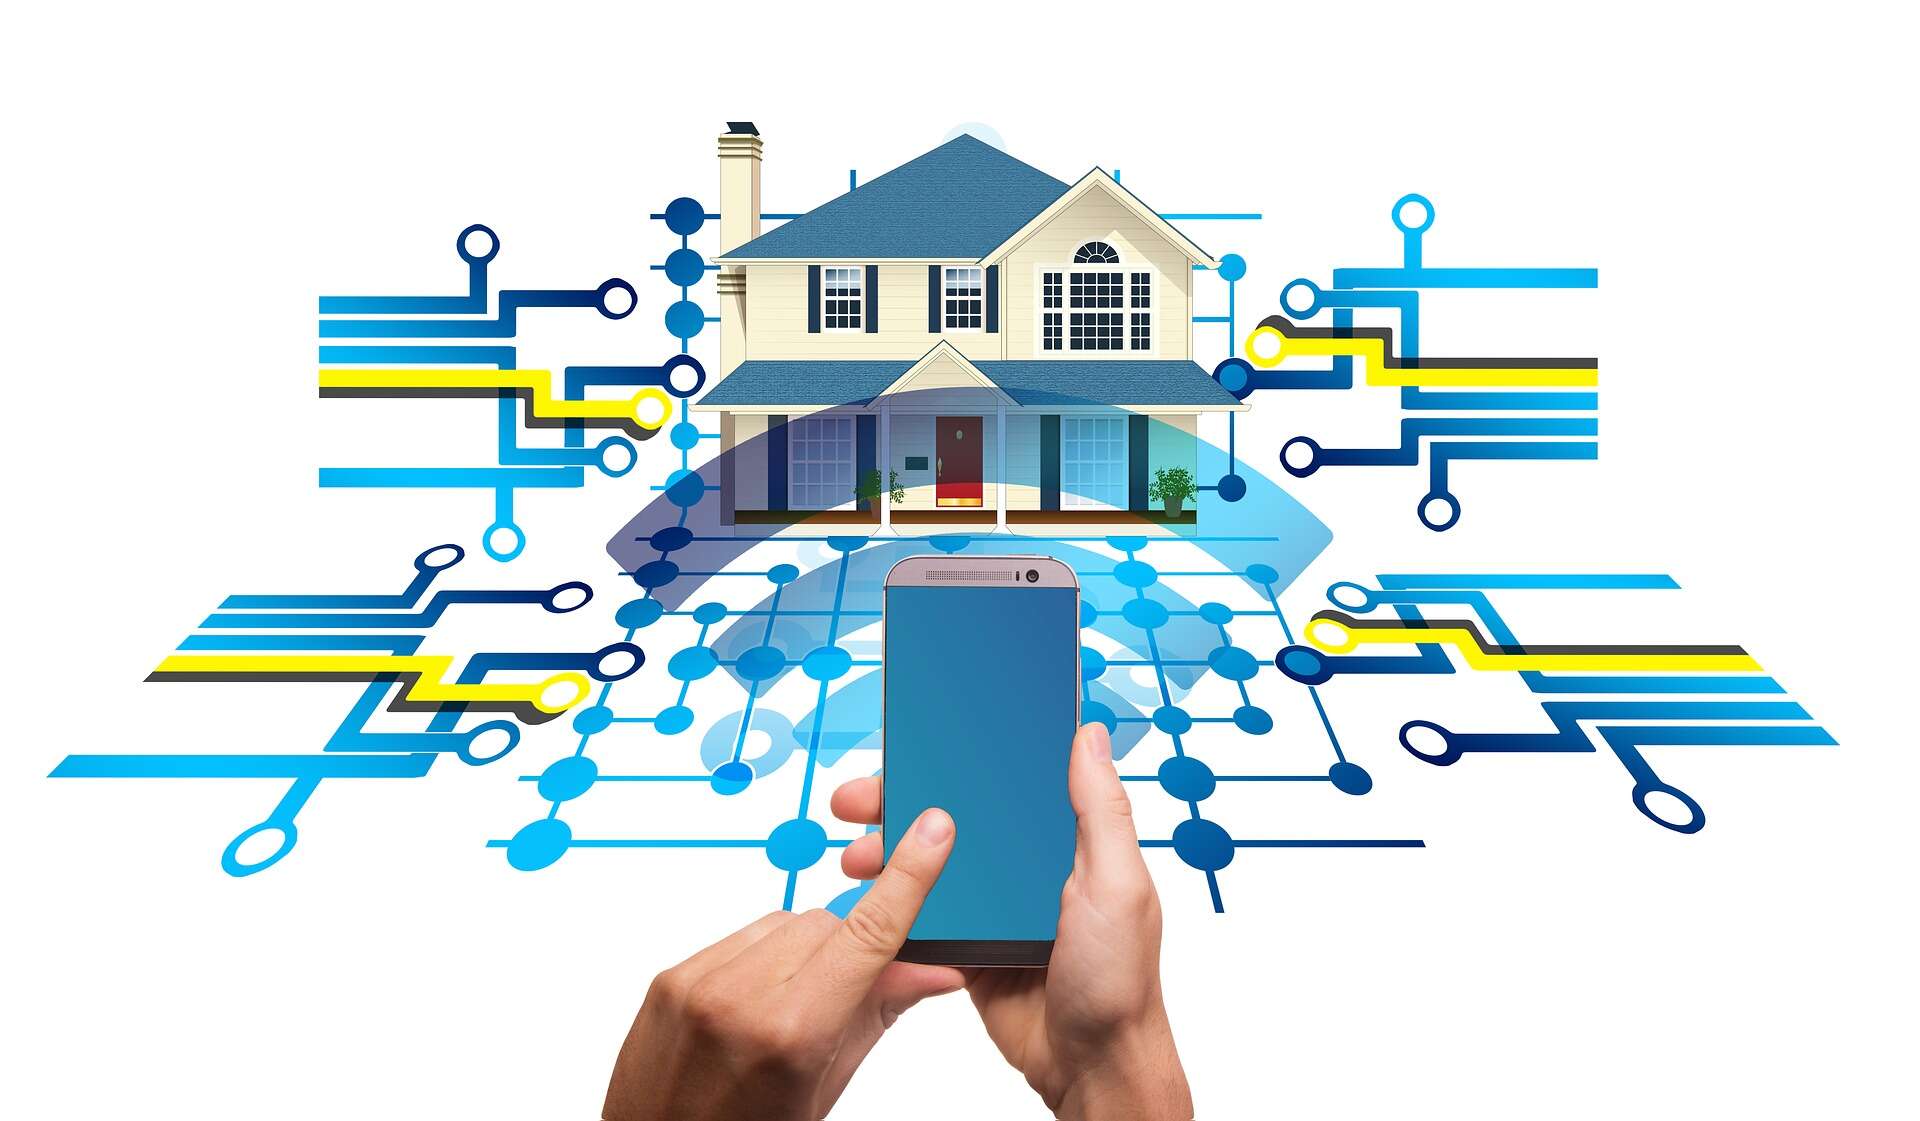 The IoT Revolution: Connected Devices and the Ultimate Vision for a Smart Home